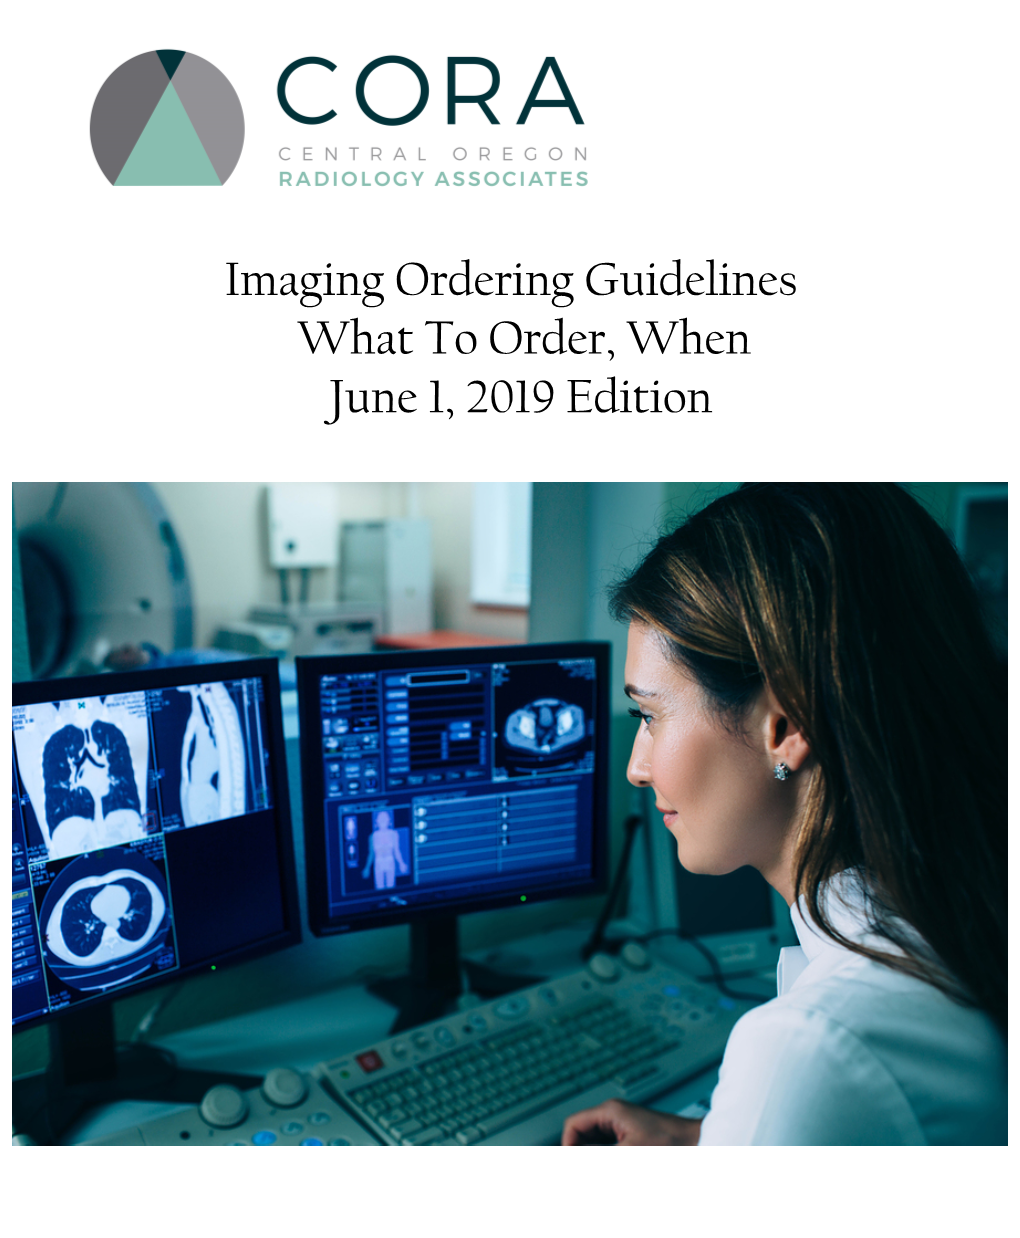 Imaging Ordering Guidelines What to Order, When June 1, 2019 Edition